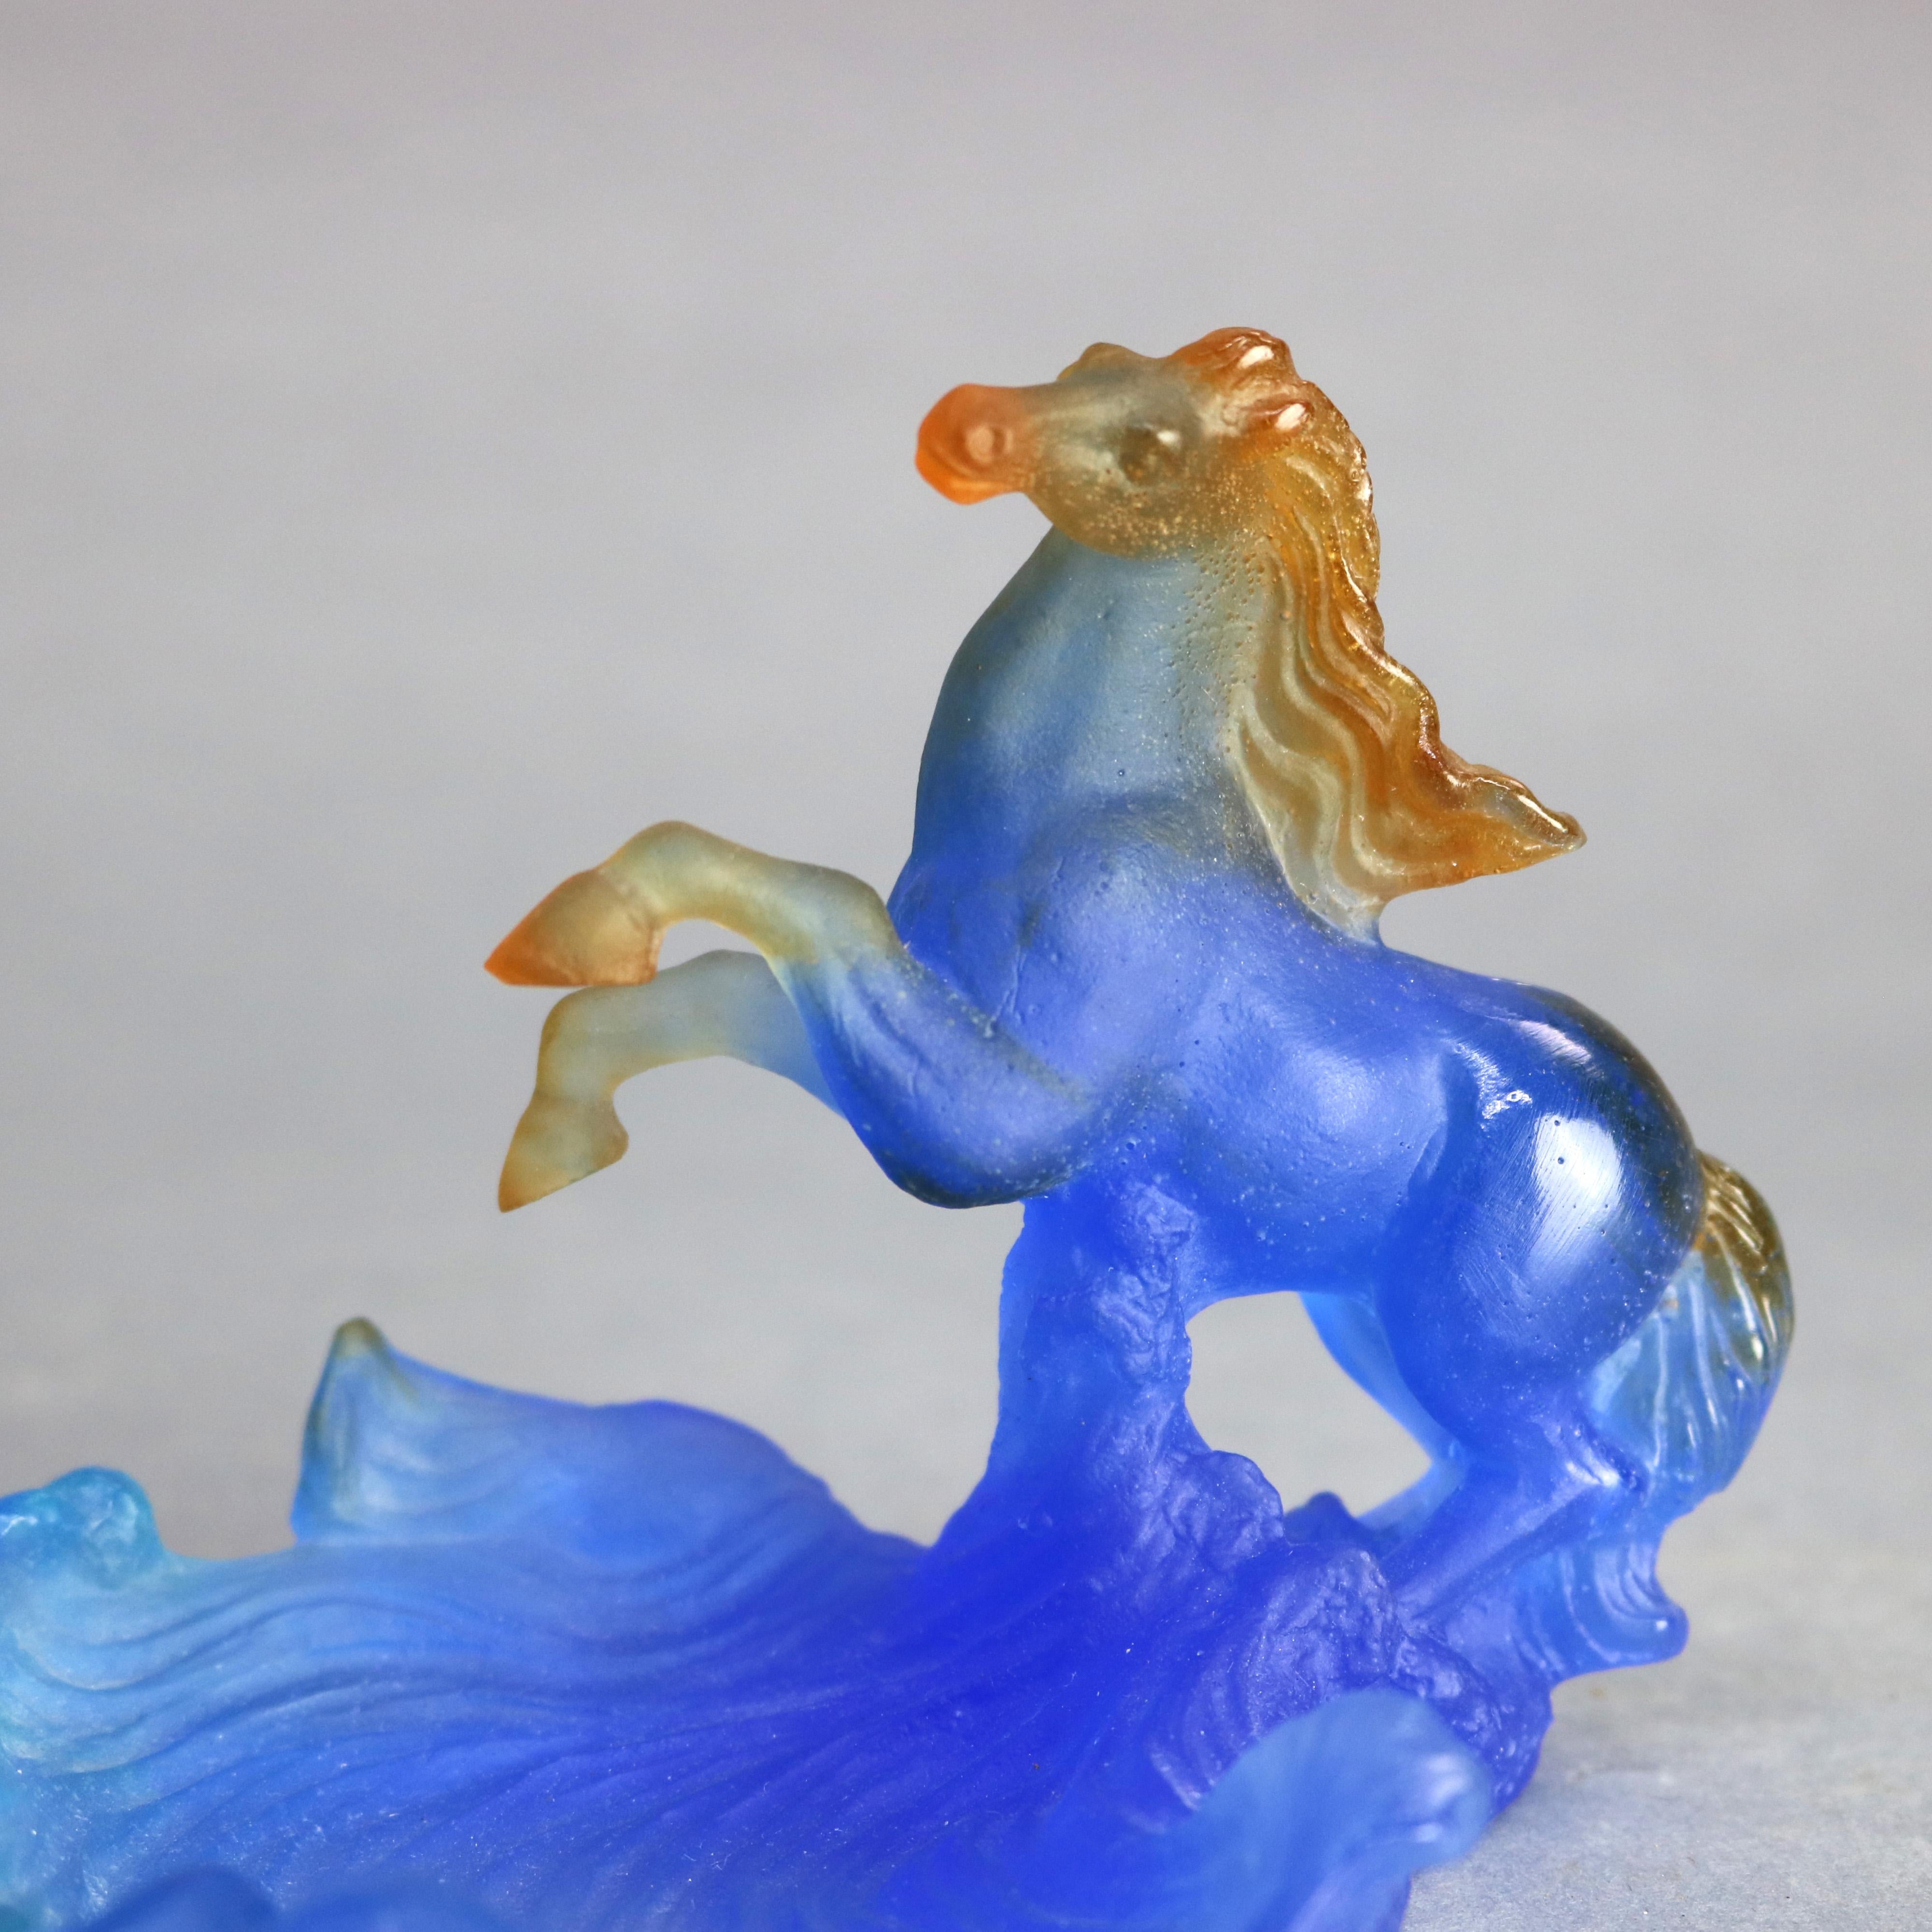 An antique French Art Nouveau figural dresser dish by Datum Nancy offers Pate de Verre art glass construction with horse over water form bowl, signed as photographed, 20th century.

Measures: 4.25